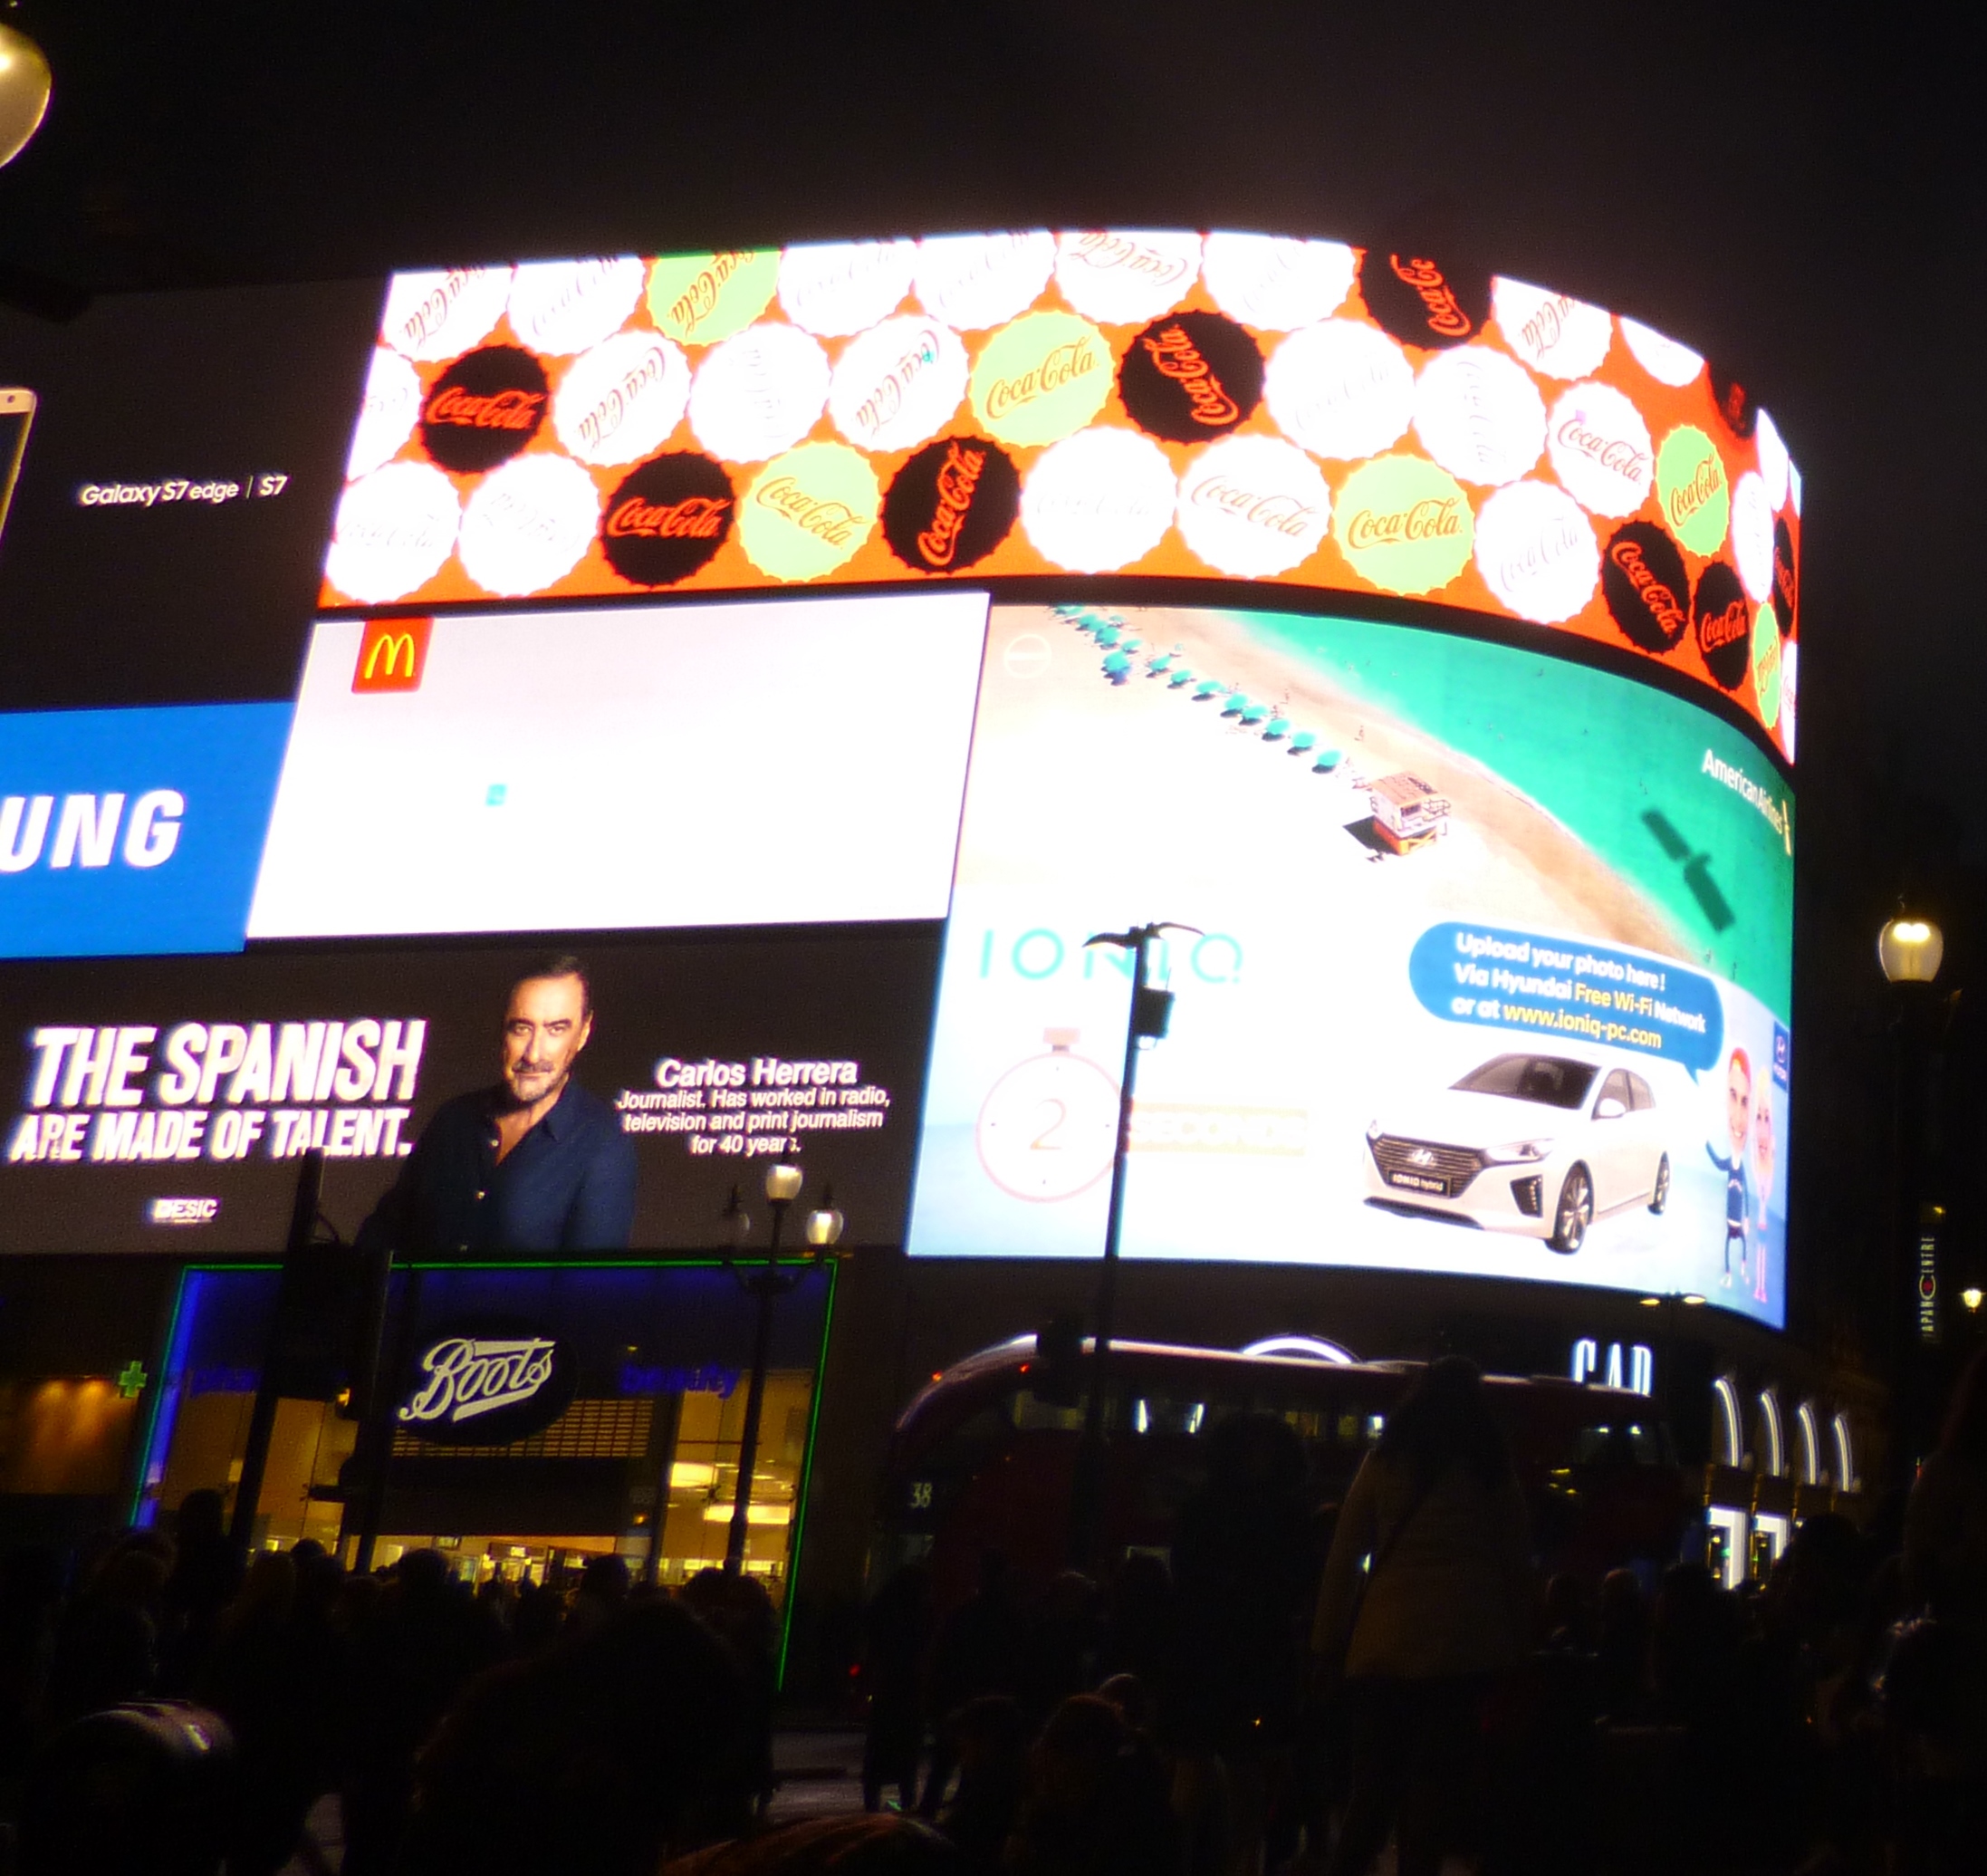 Piccadilly Circus